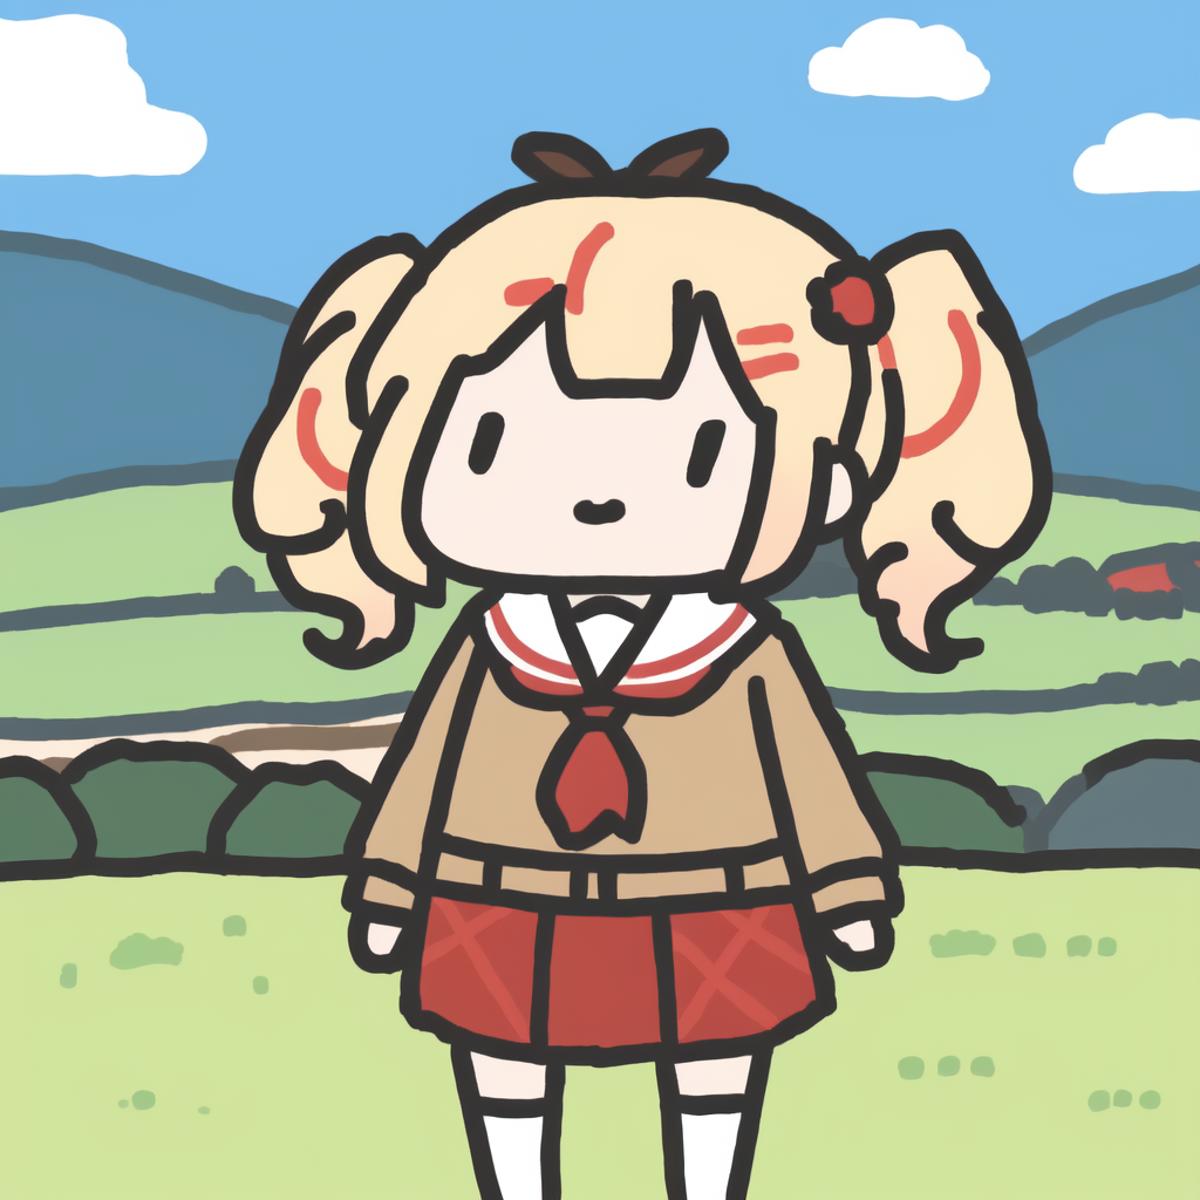 A Cartoon Anime Girl with Pigtails and a Red Ribbon Standing in a Field.